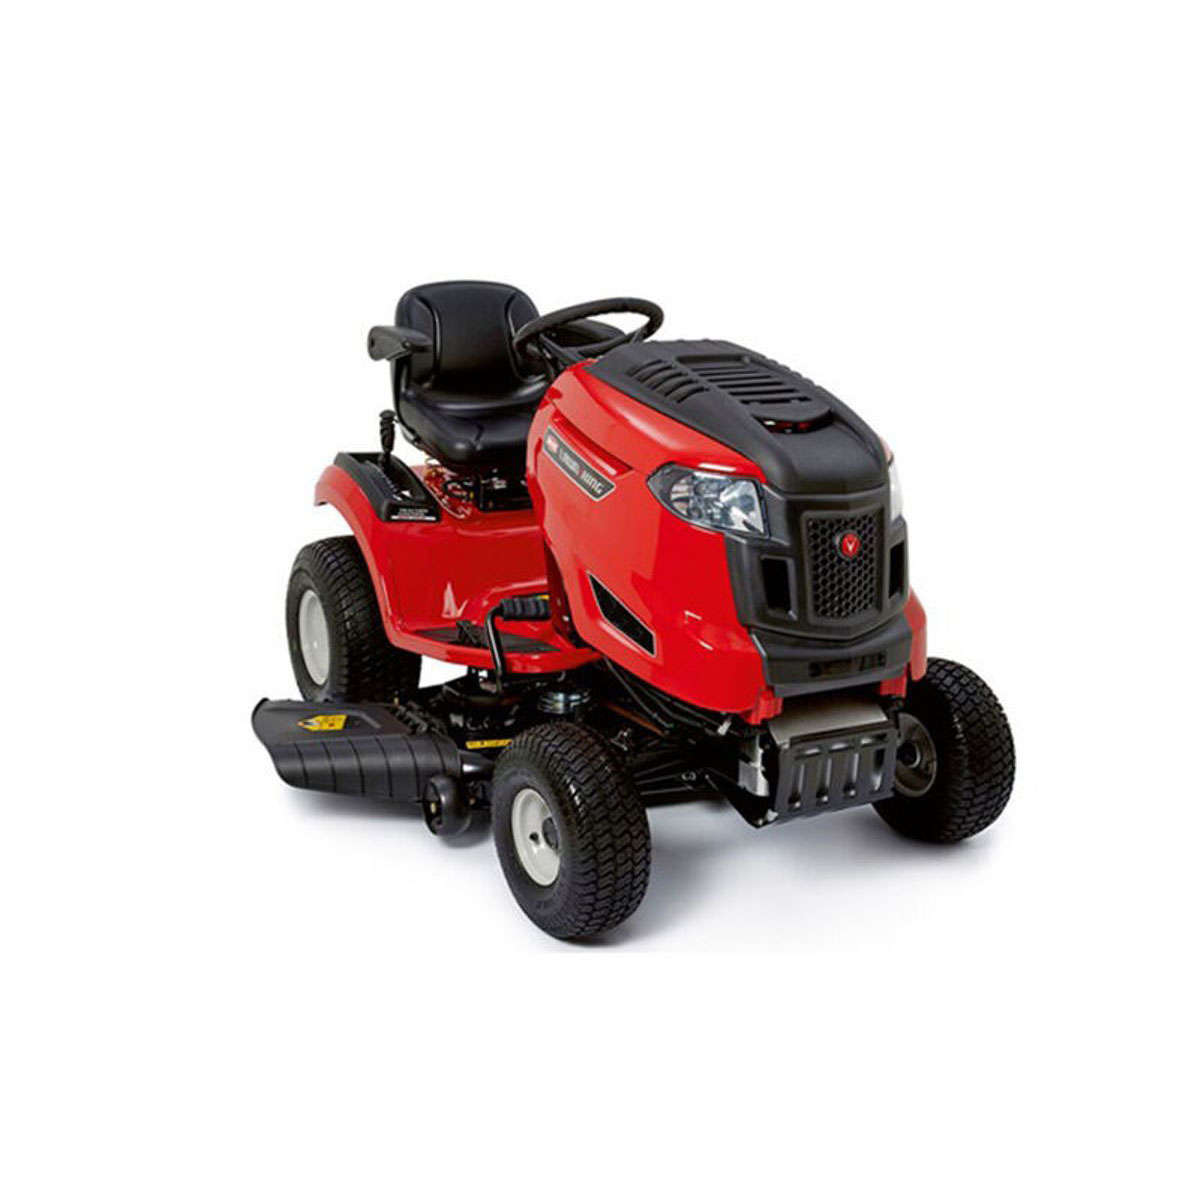 Rover Lawn King 2142andquot Ride On Mower 